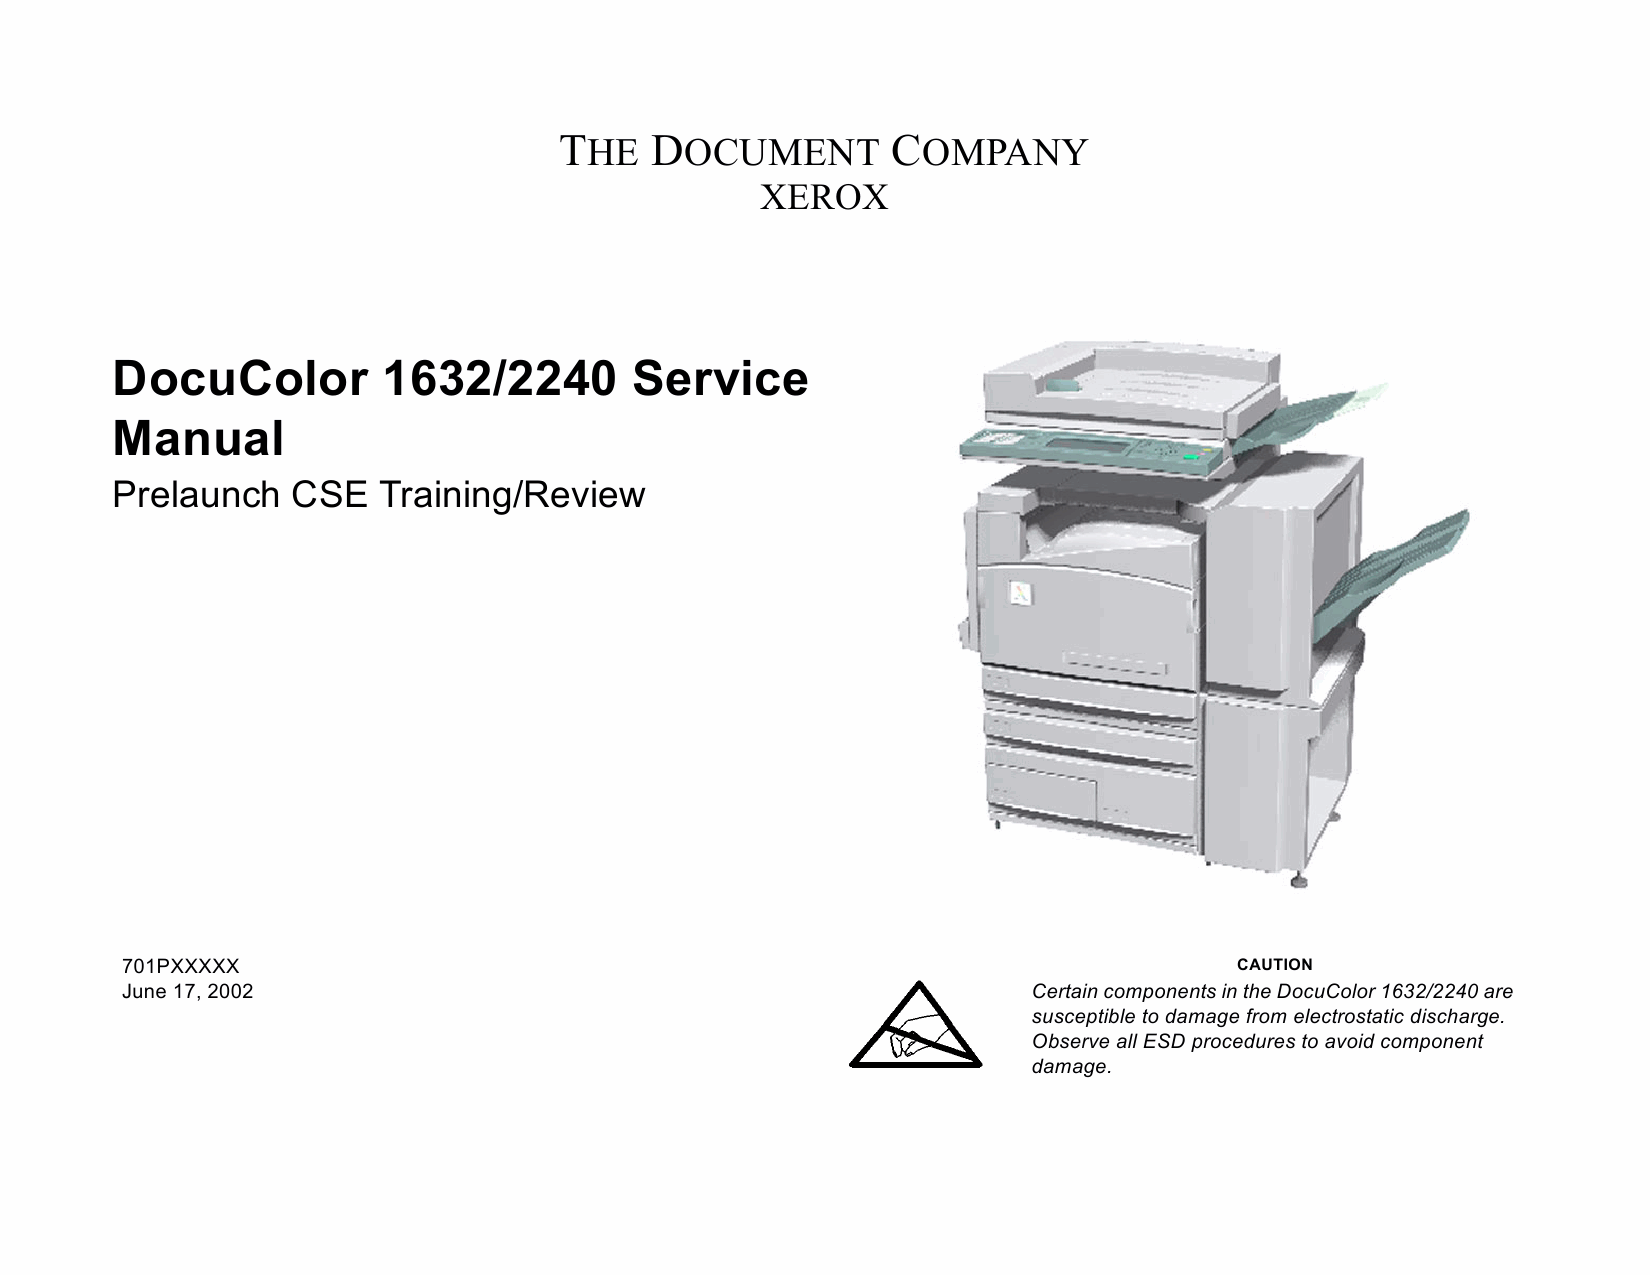 Xerox DocuColor 1632 2240 Parts List and Service Manual-1